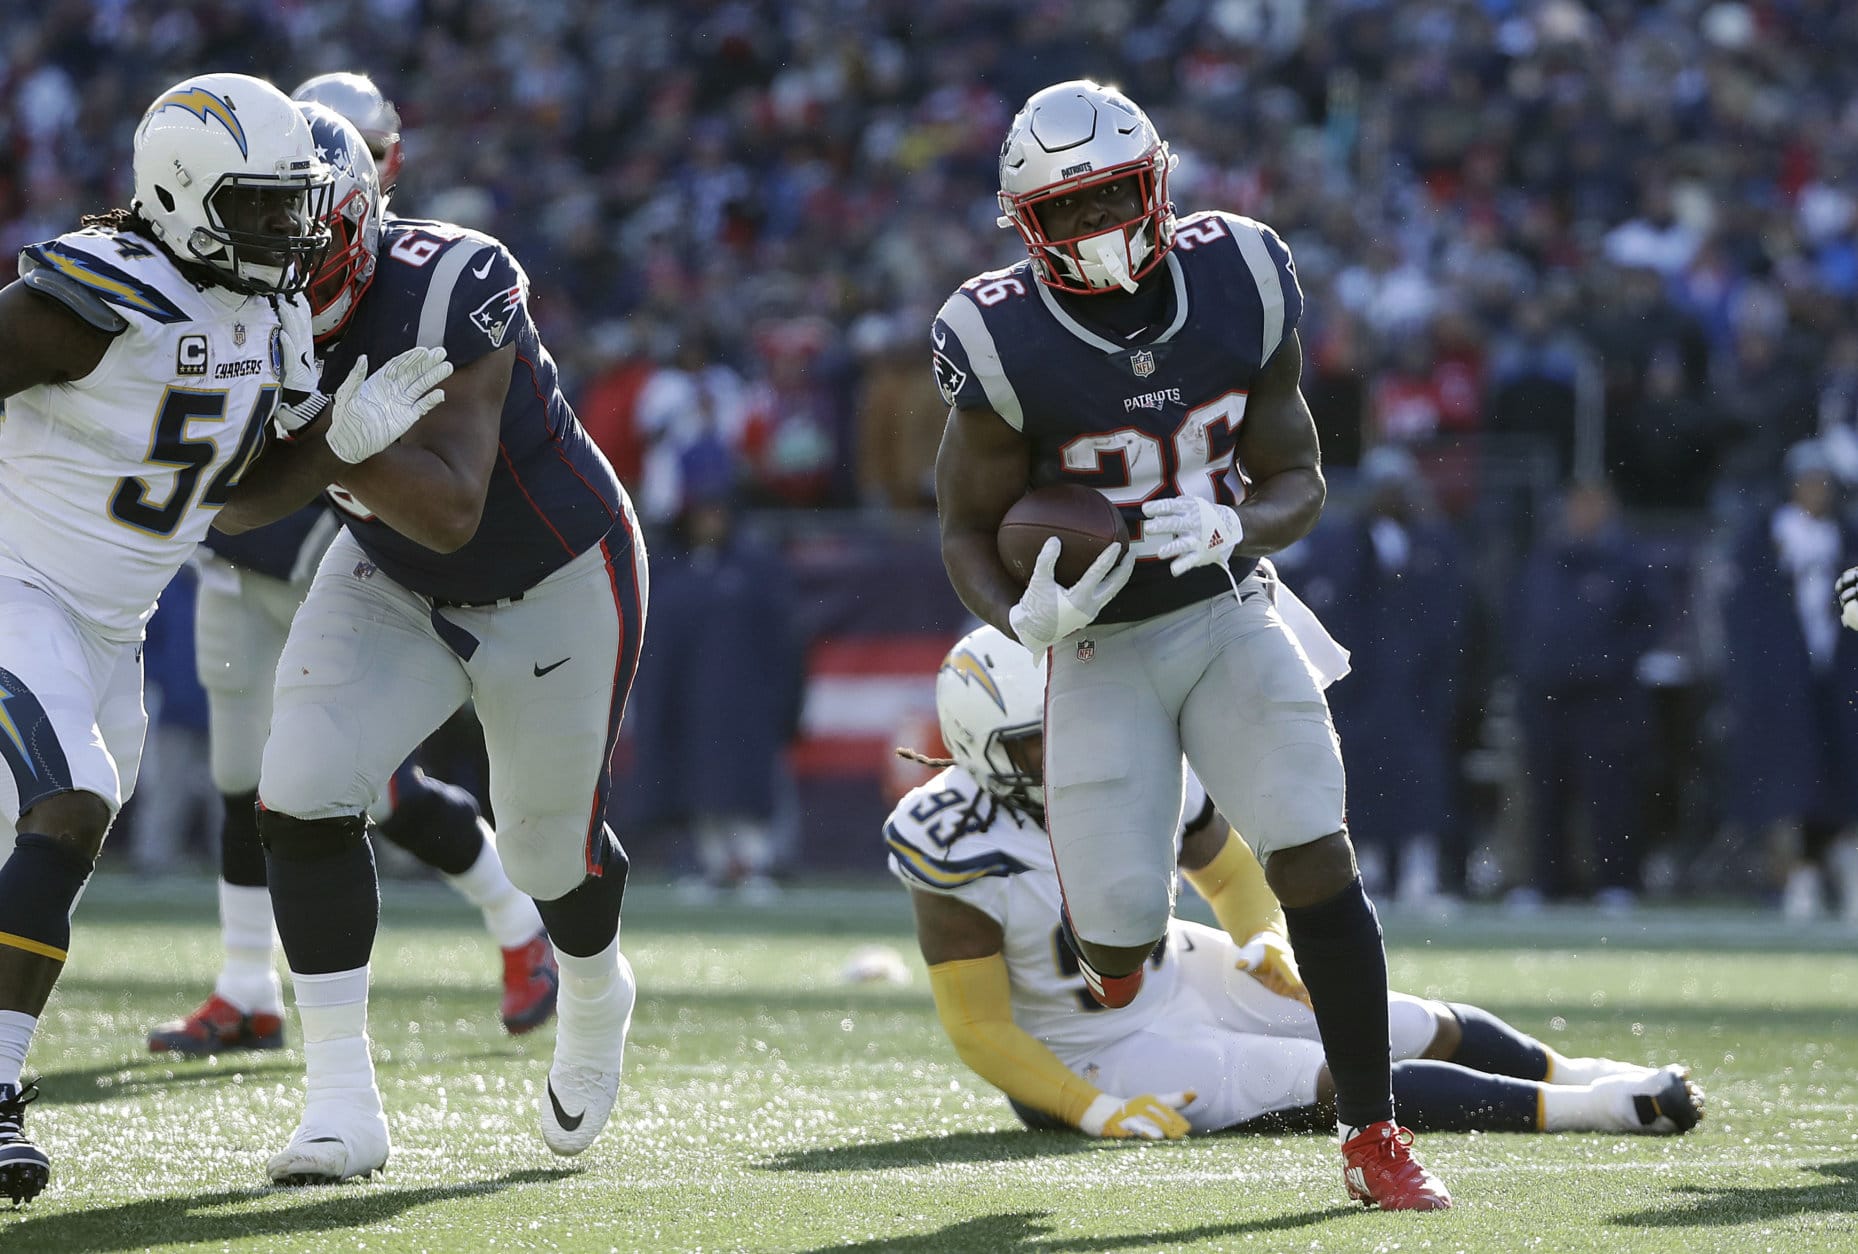 New England Patriots running back Sony Michel heads for the goal line and his second touchdown during the first half of an NFL divisional playoff football game against the Los Angeles Chargers, Sunday, Jan. 13, 2019, in Foxborough, Mass. (AP Photo/Elise Amendola)